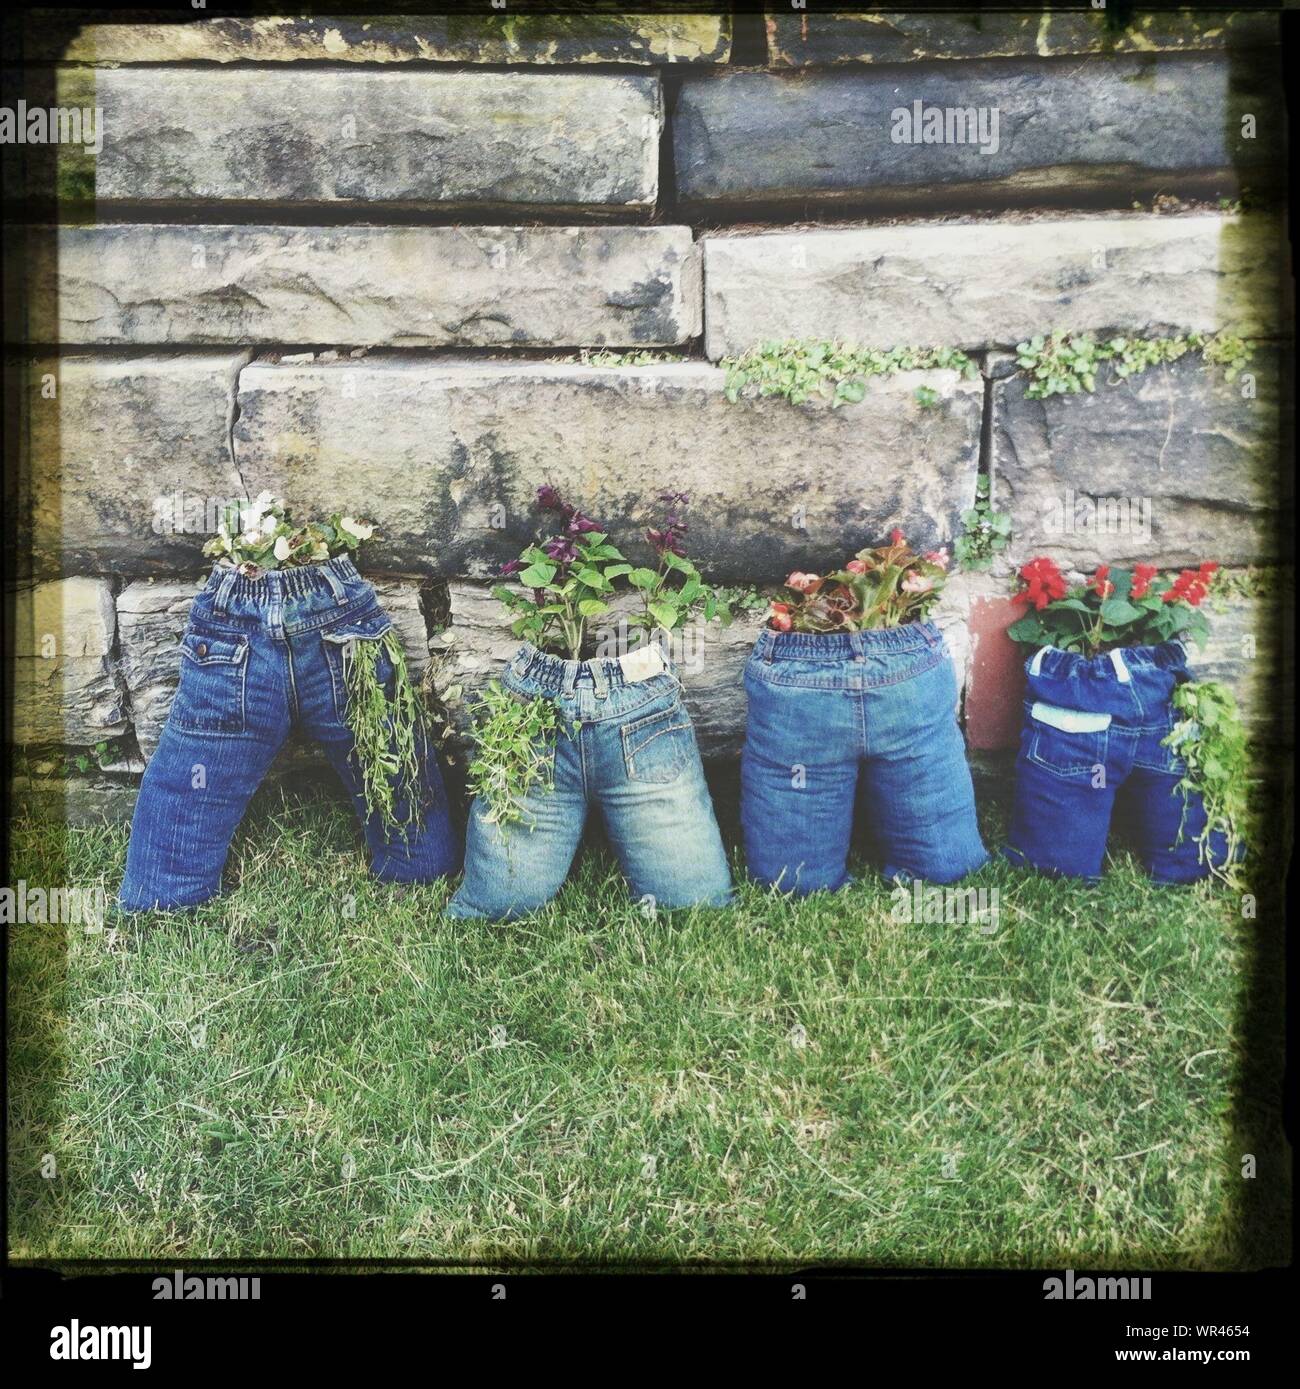 Denims Used For Growing Plants In Yard Stock Photo